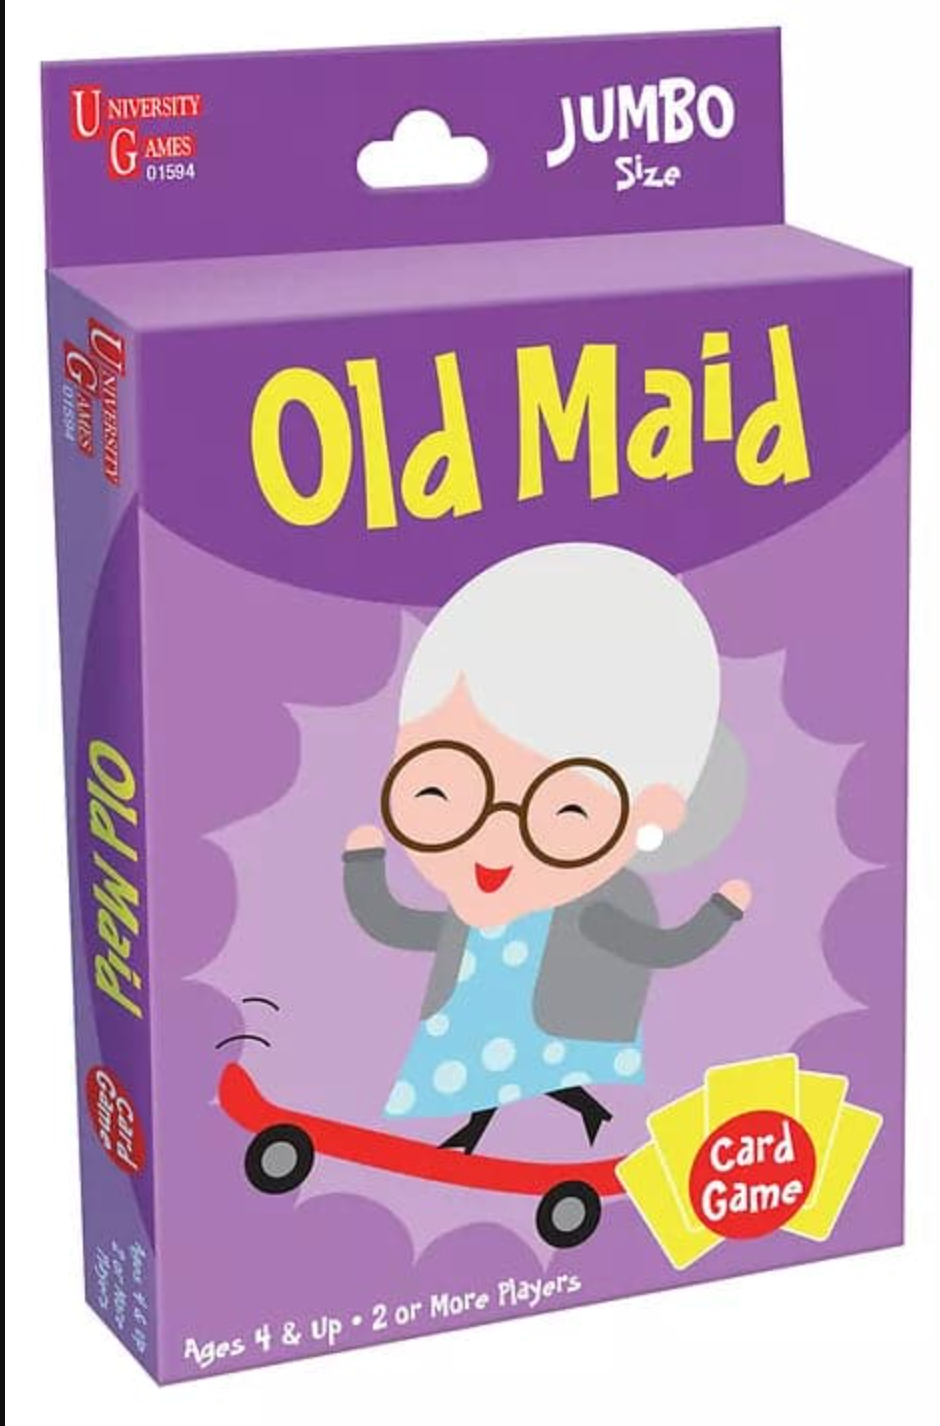 OLD MAID CARD GAME